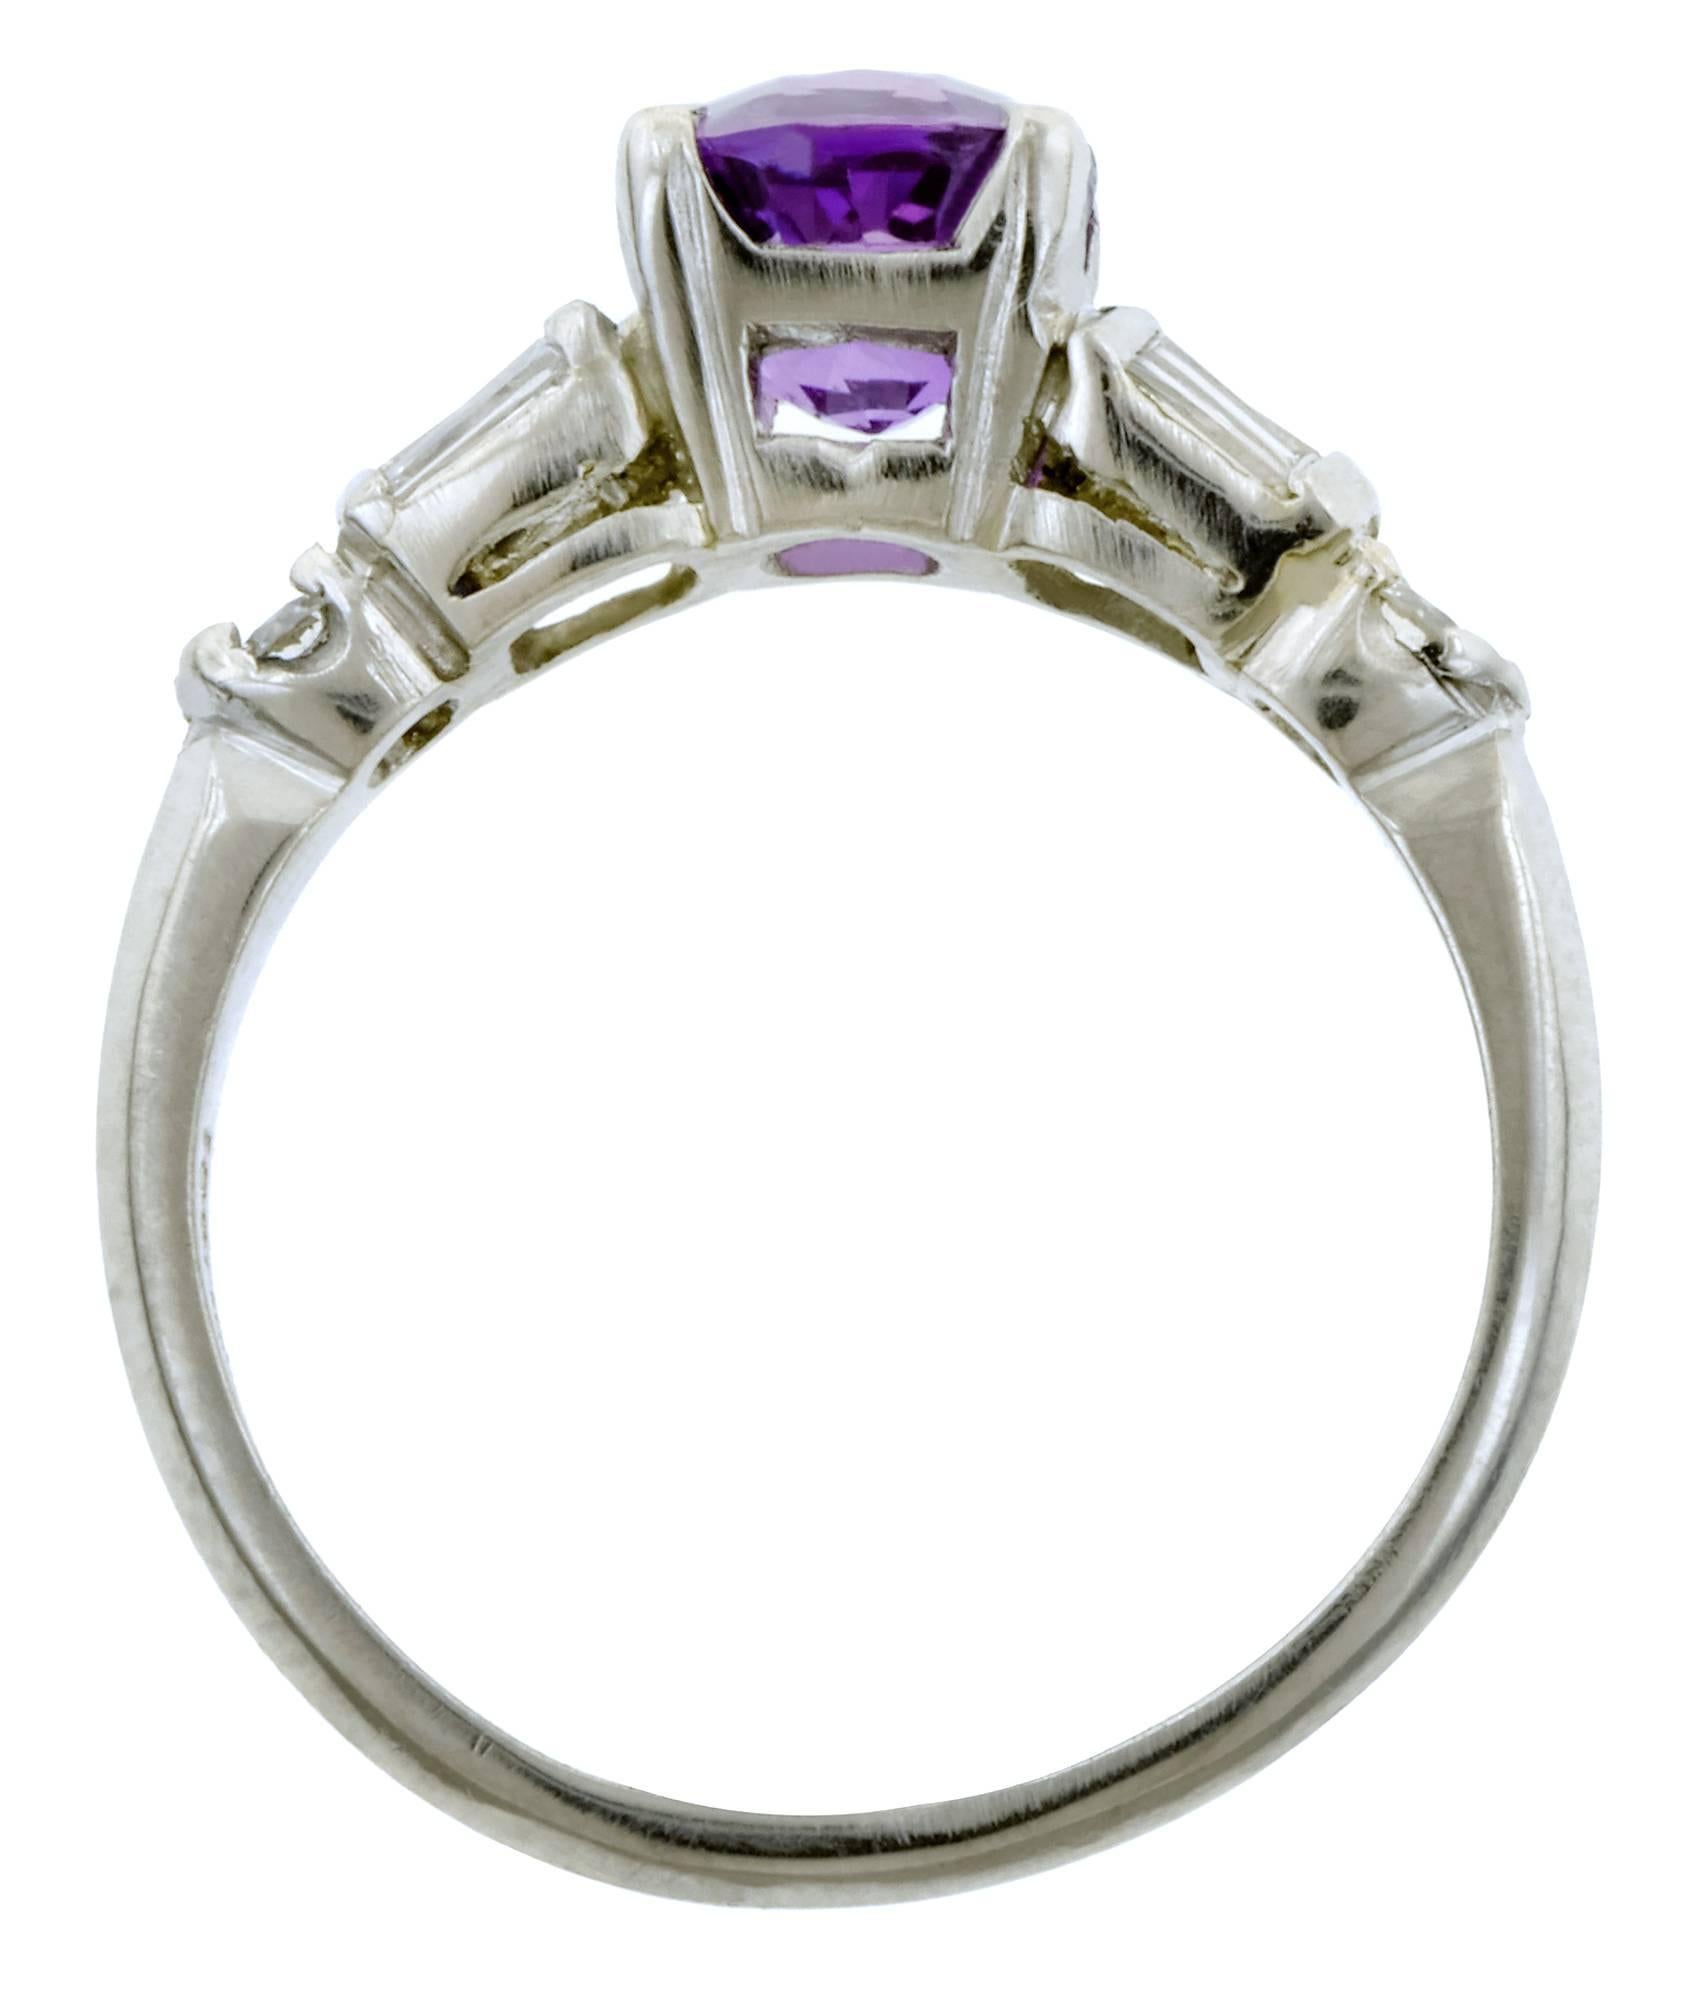 Vintage sapphire ring centering a Cushion cut pink-purple sapphire weighing app. 2.04ct, flanked by six Baguette cuts & two Round Brilliant cut diamonds weighing app. 0.66ctw., fashioned in platinum. Circa 1945. Size 7.